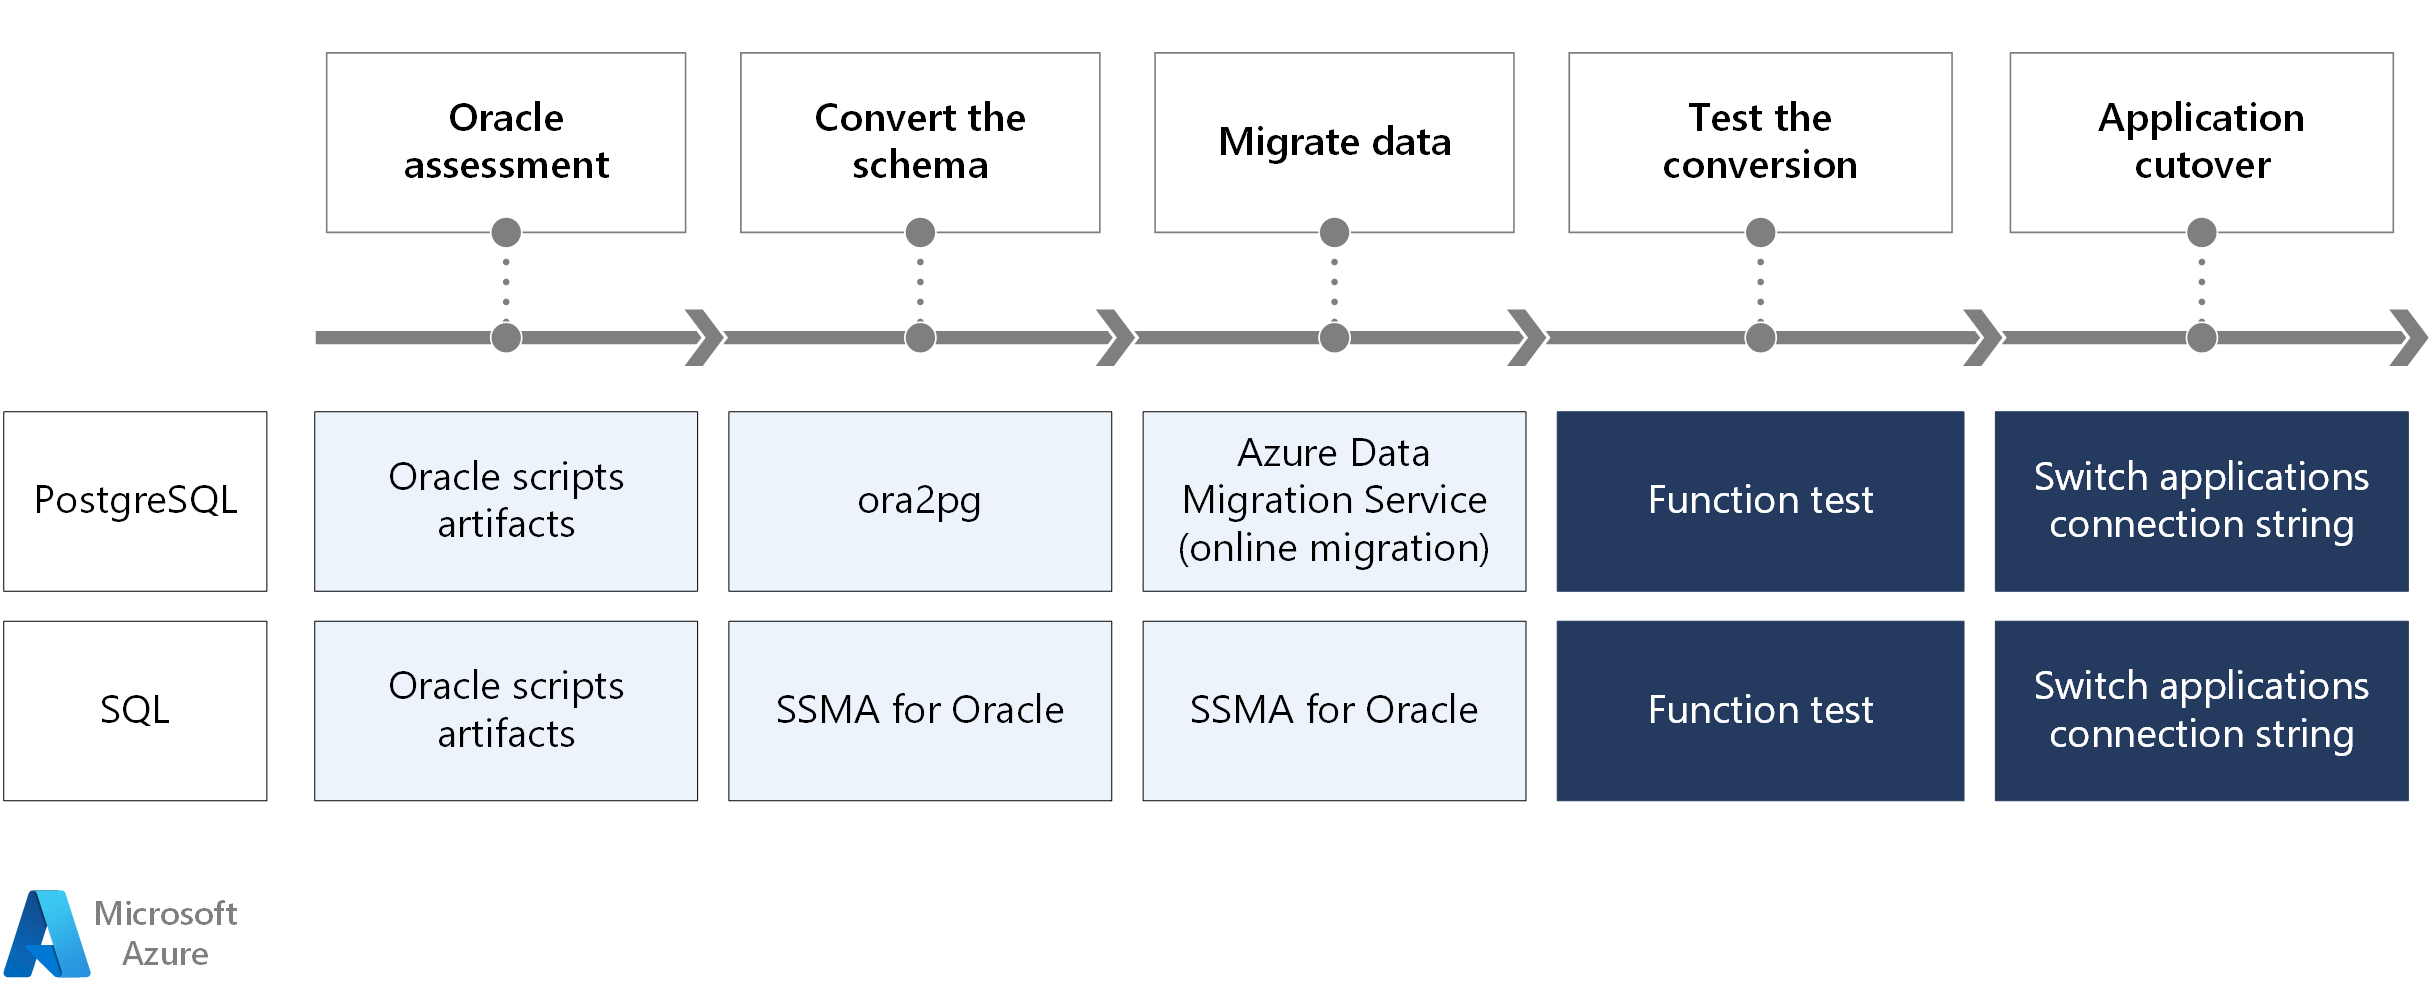 Flow chart depicting the steps you have to take to convert your Oracle Database to a SQL or PostgreSQL database in Azure.